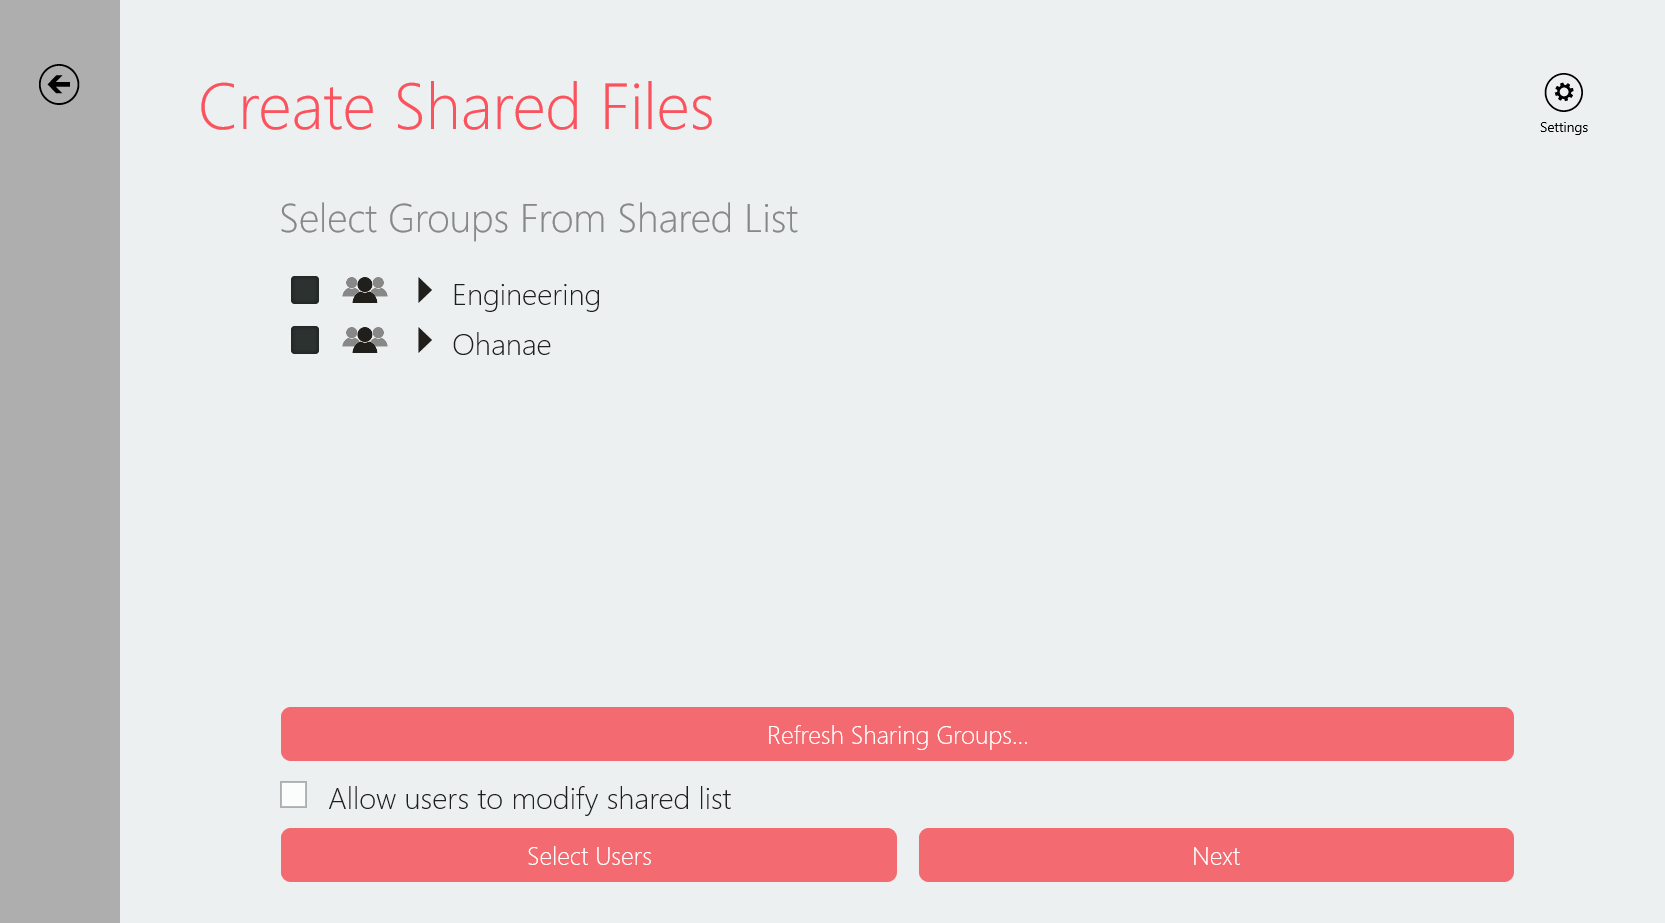 File sharing groups allow you to quickly share files with a group of users